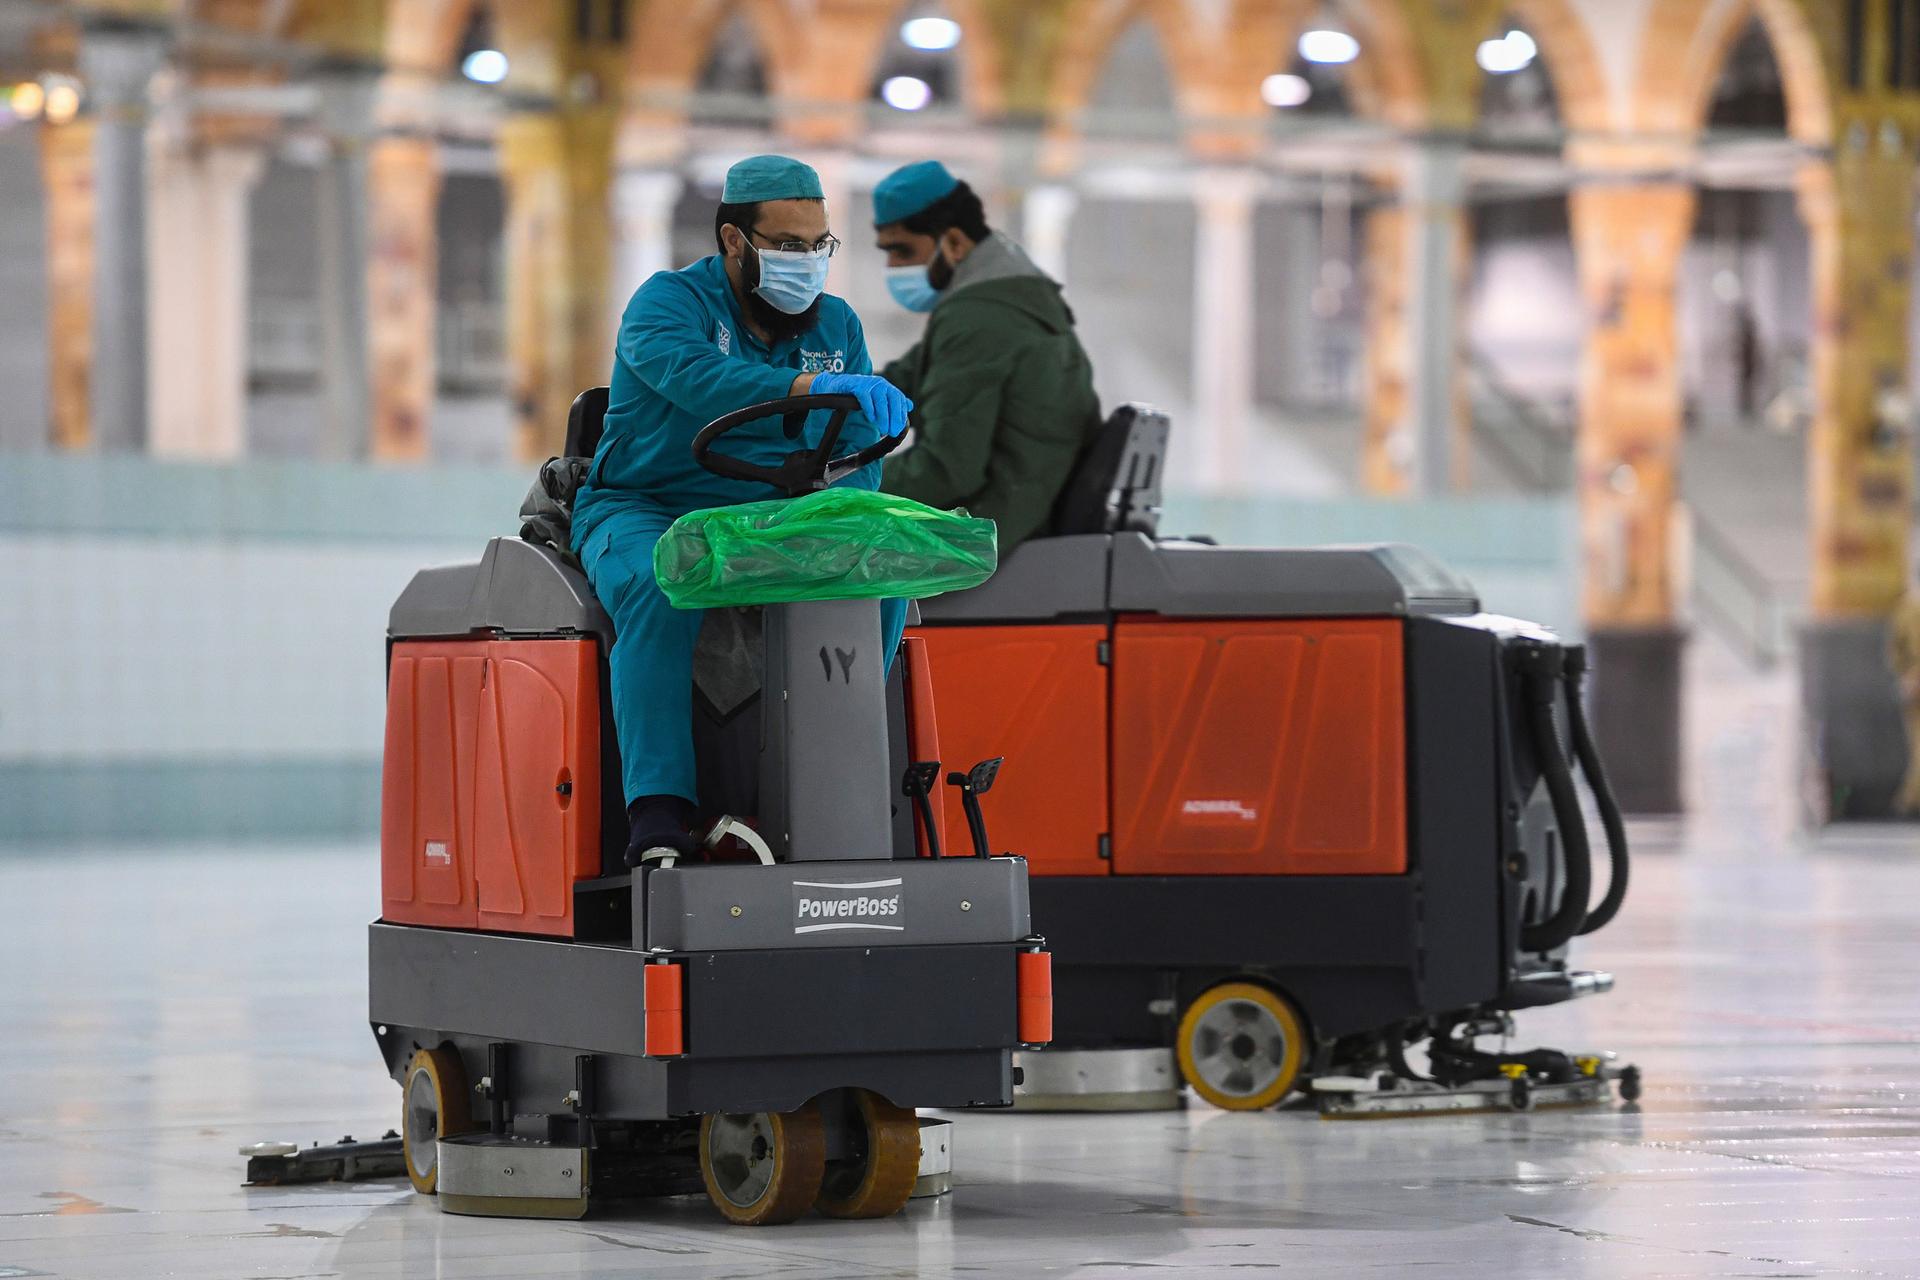 Two men are shown driving small machines that are polishing marble floors.